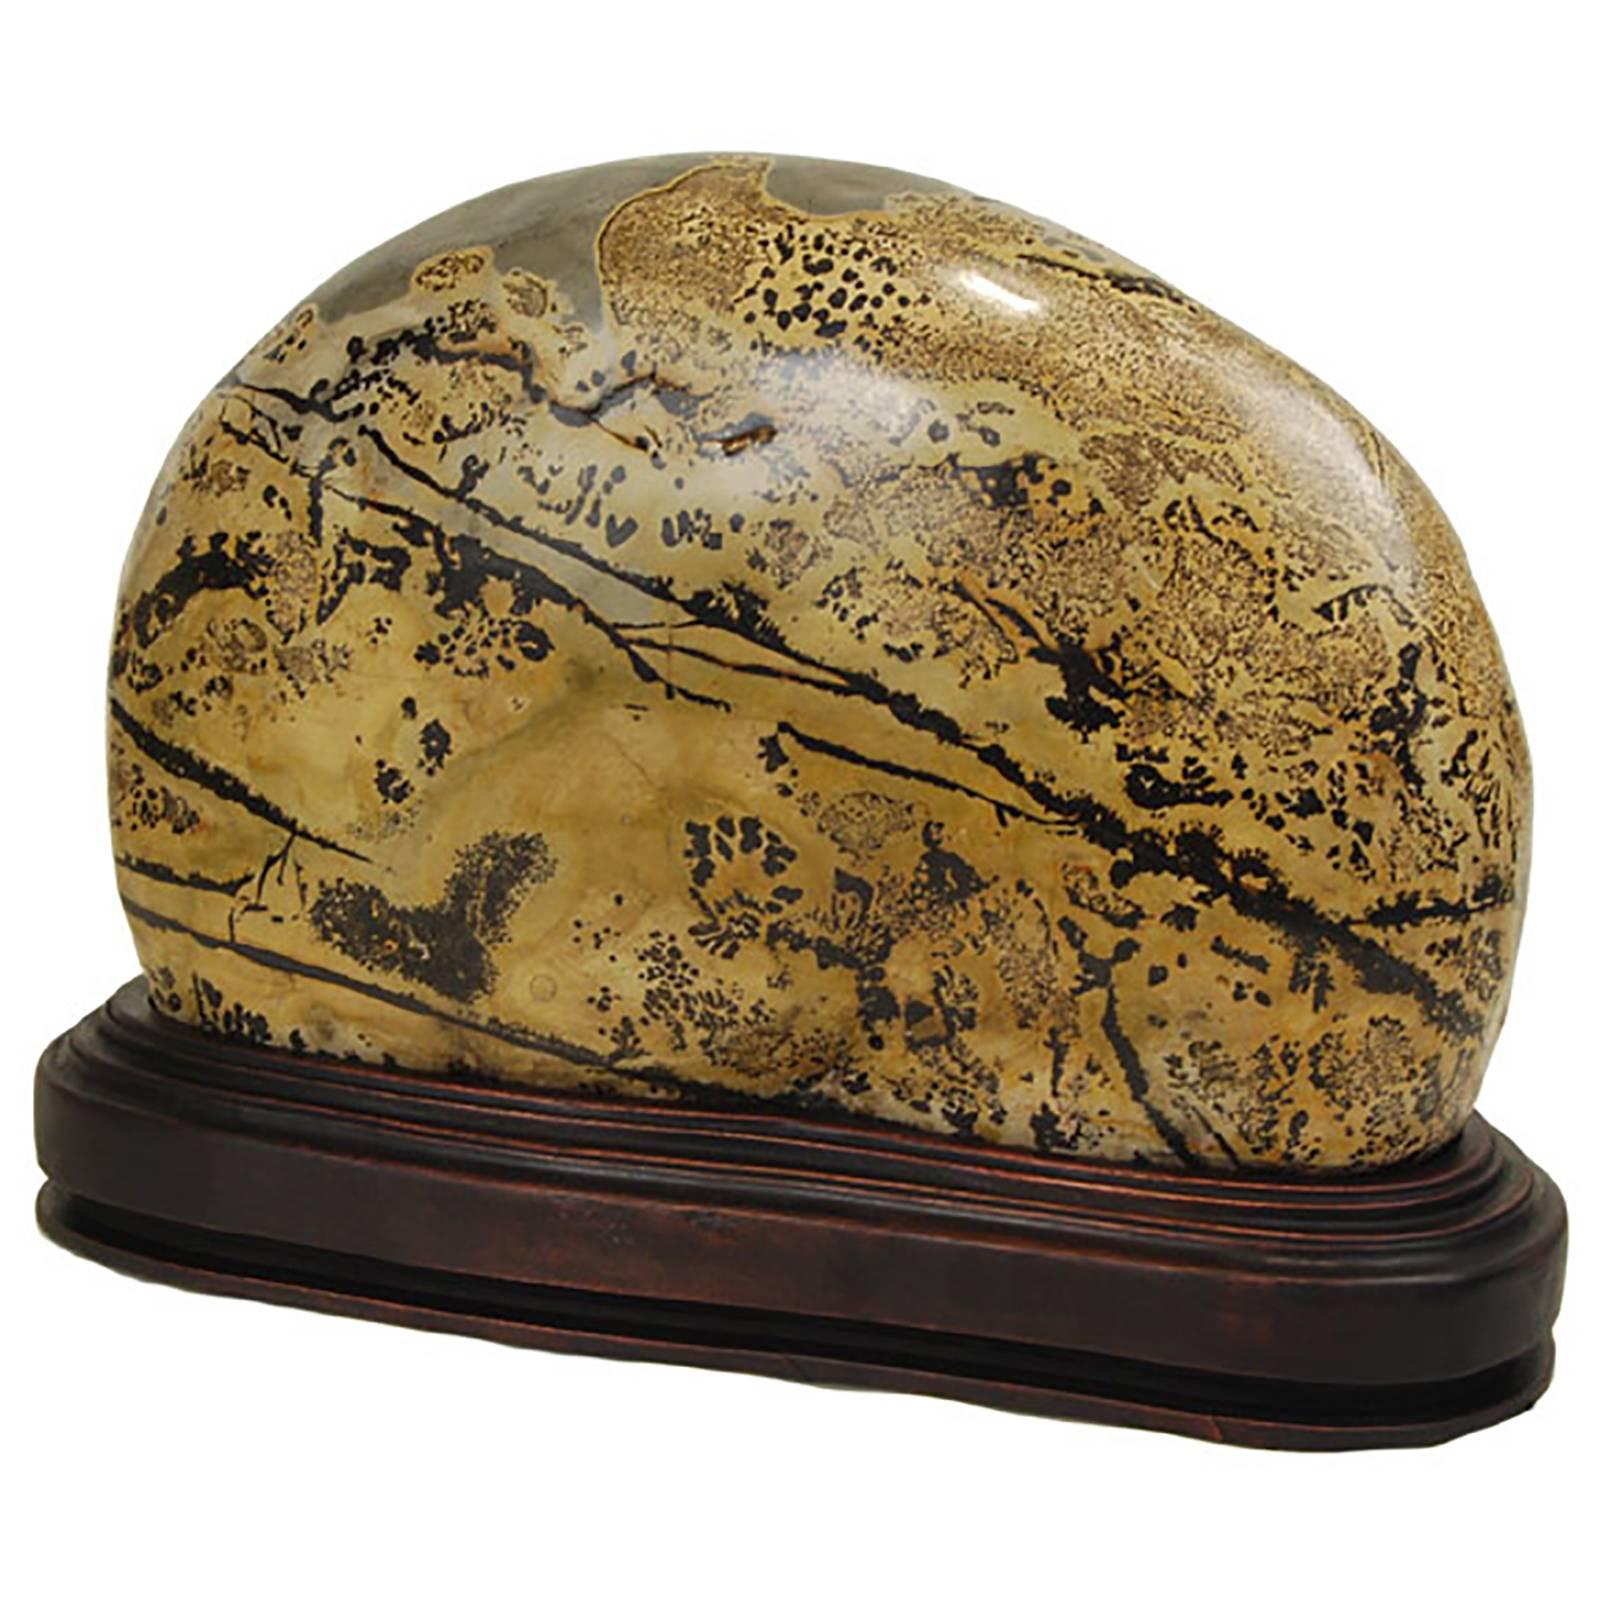 As if brushed with ink and inscribed with intricate calligraphy, this polished jasper stone is marked with dark swirls and intricate patterns. Unusual stones such as this one have been appreciated by Chinese painters, poets and calligraphers for